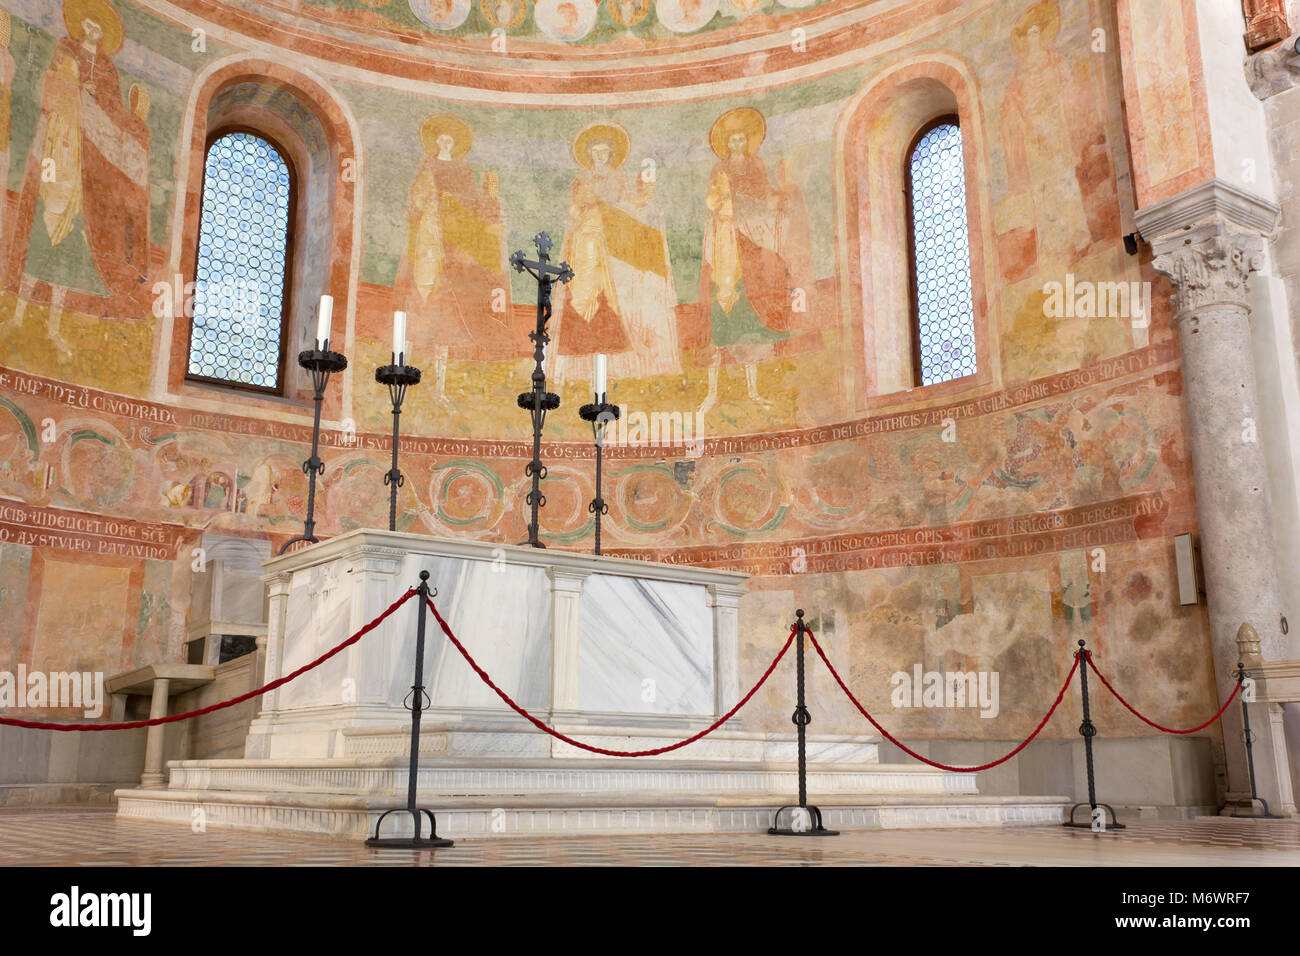 Apse and Altar in the Basilica of Aquileia, Italy Stock Photo